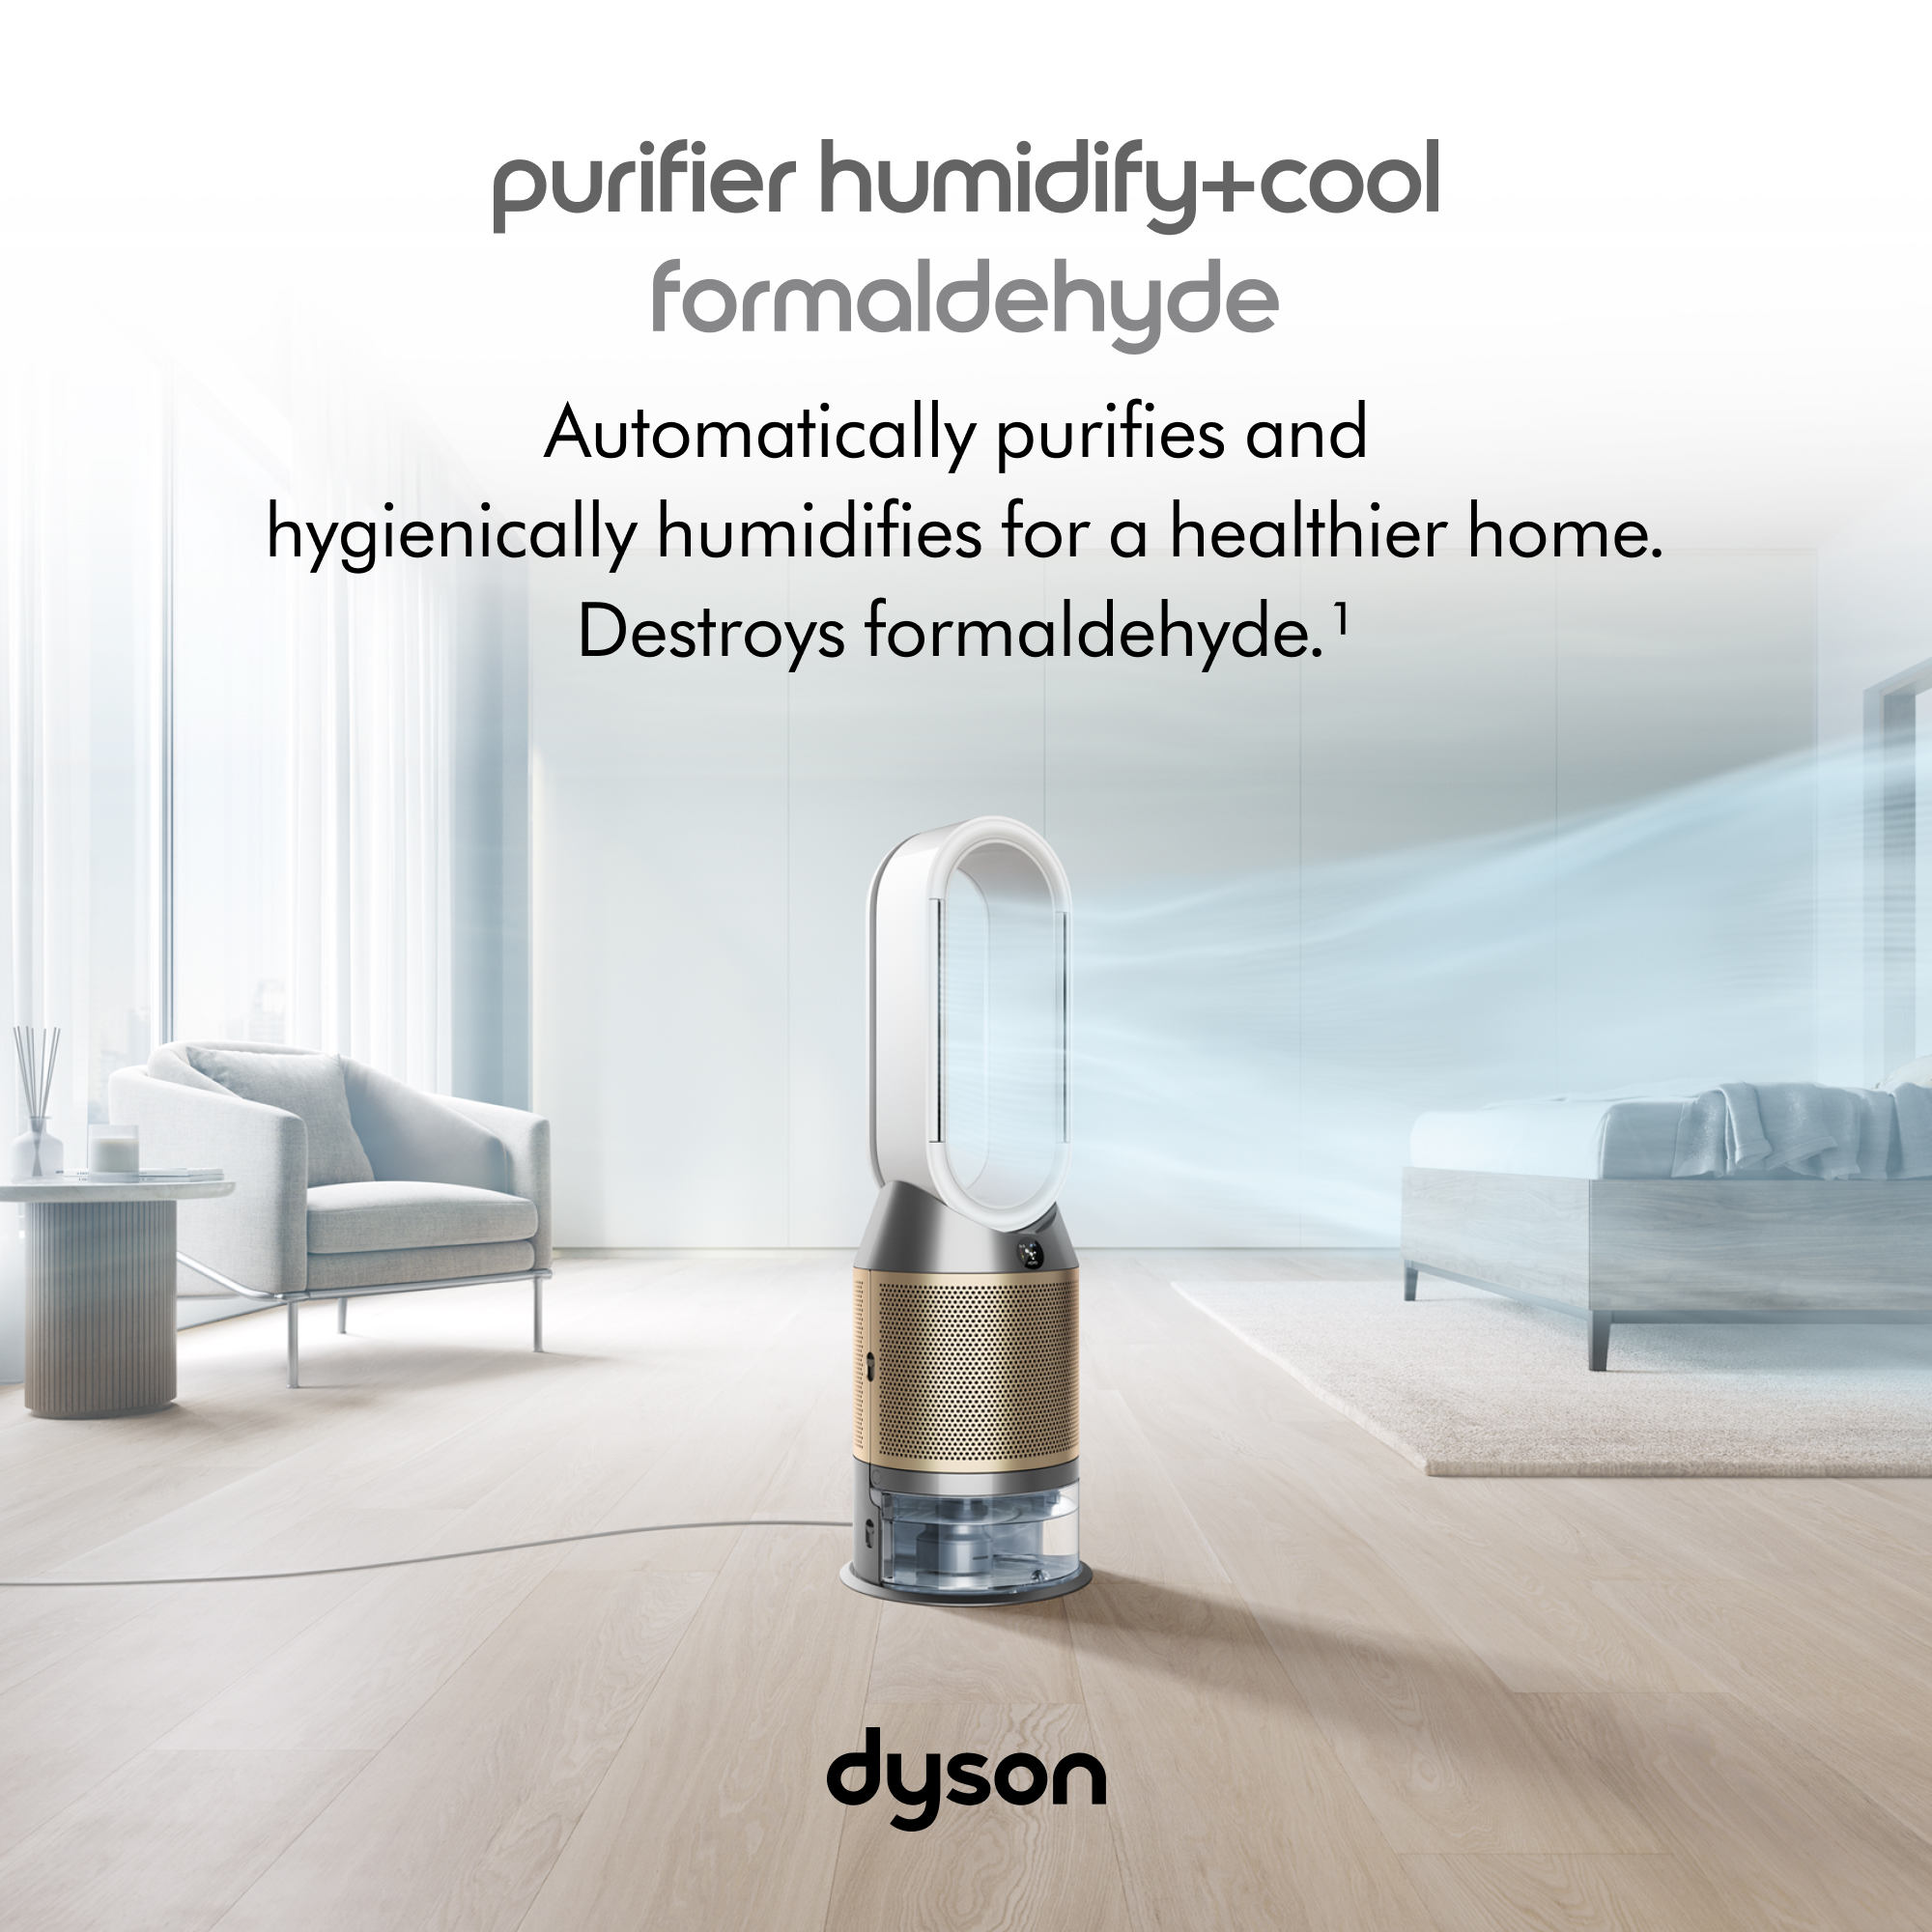 Dyson Purifier Humidify+Cool Formaldehyde™ PH04| White/Gold | New - image 3 of 8